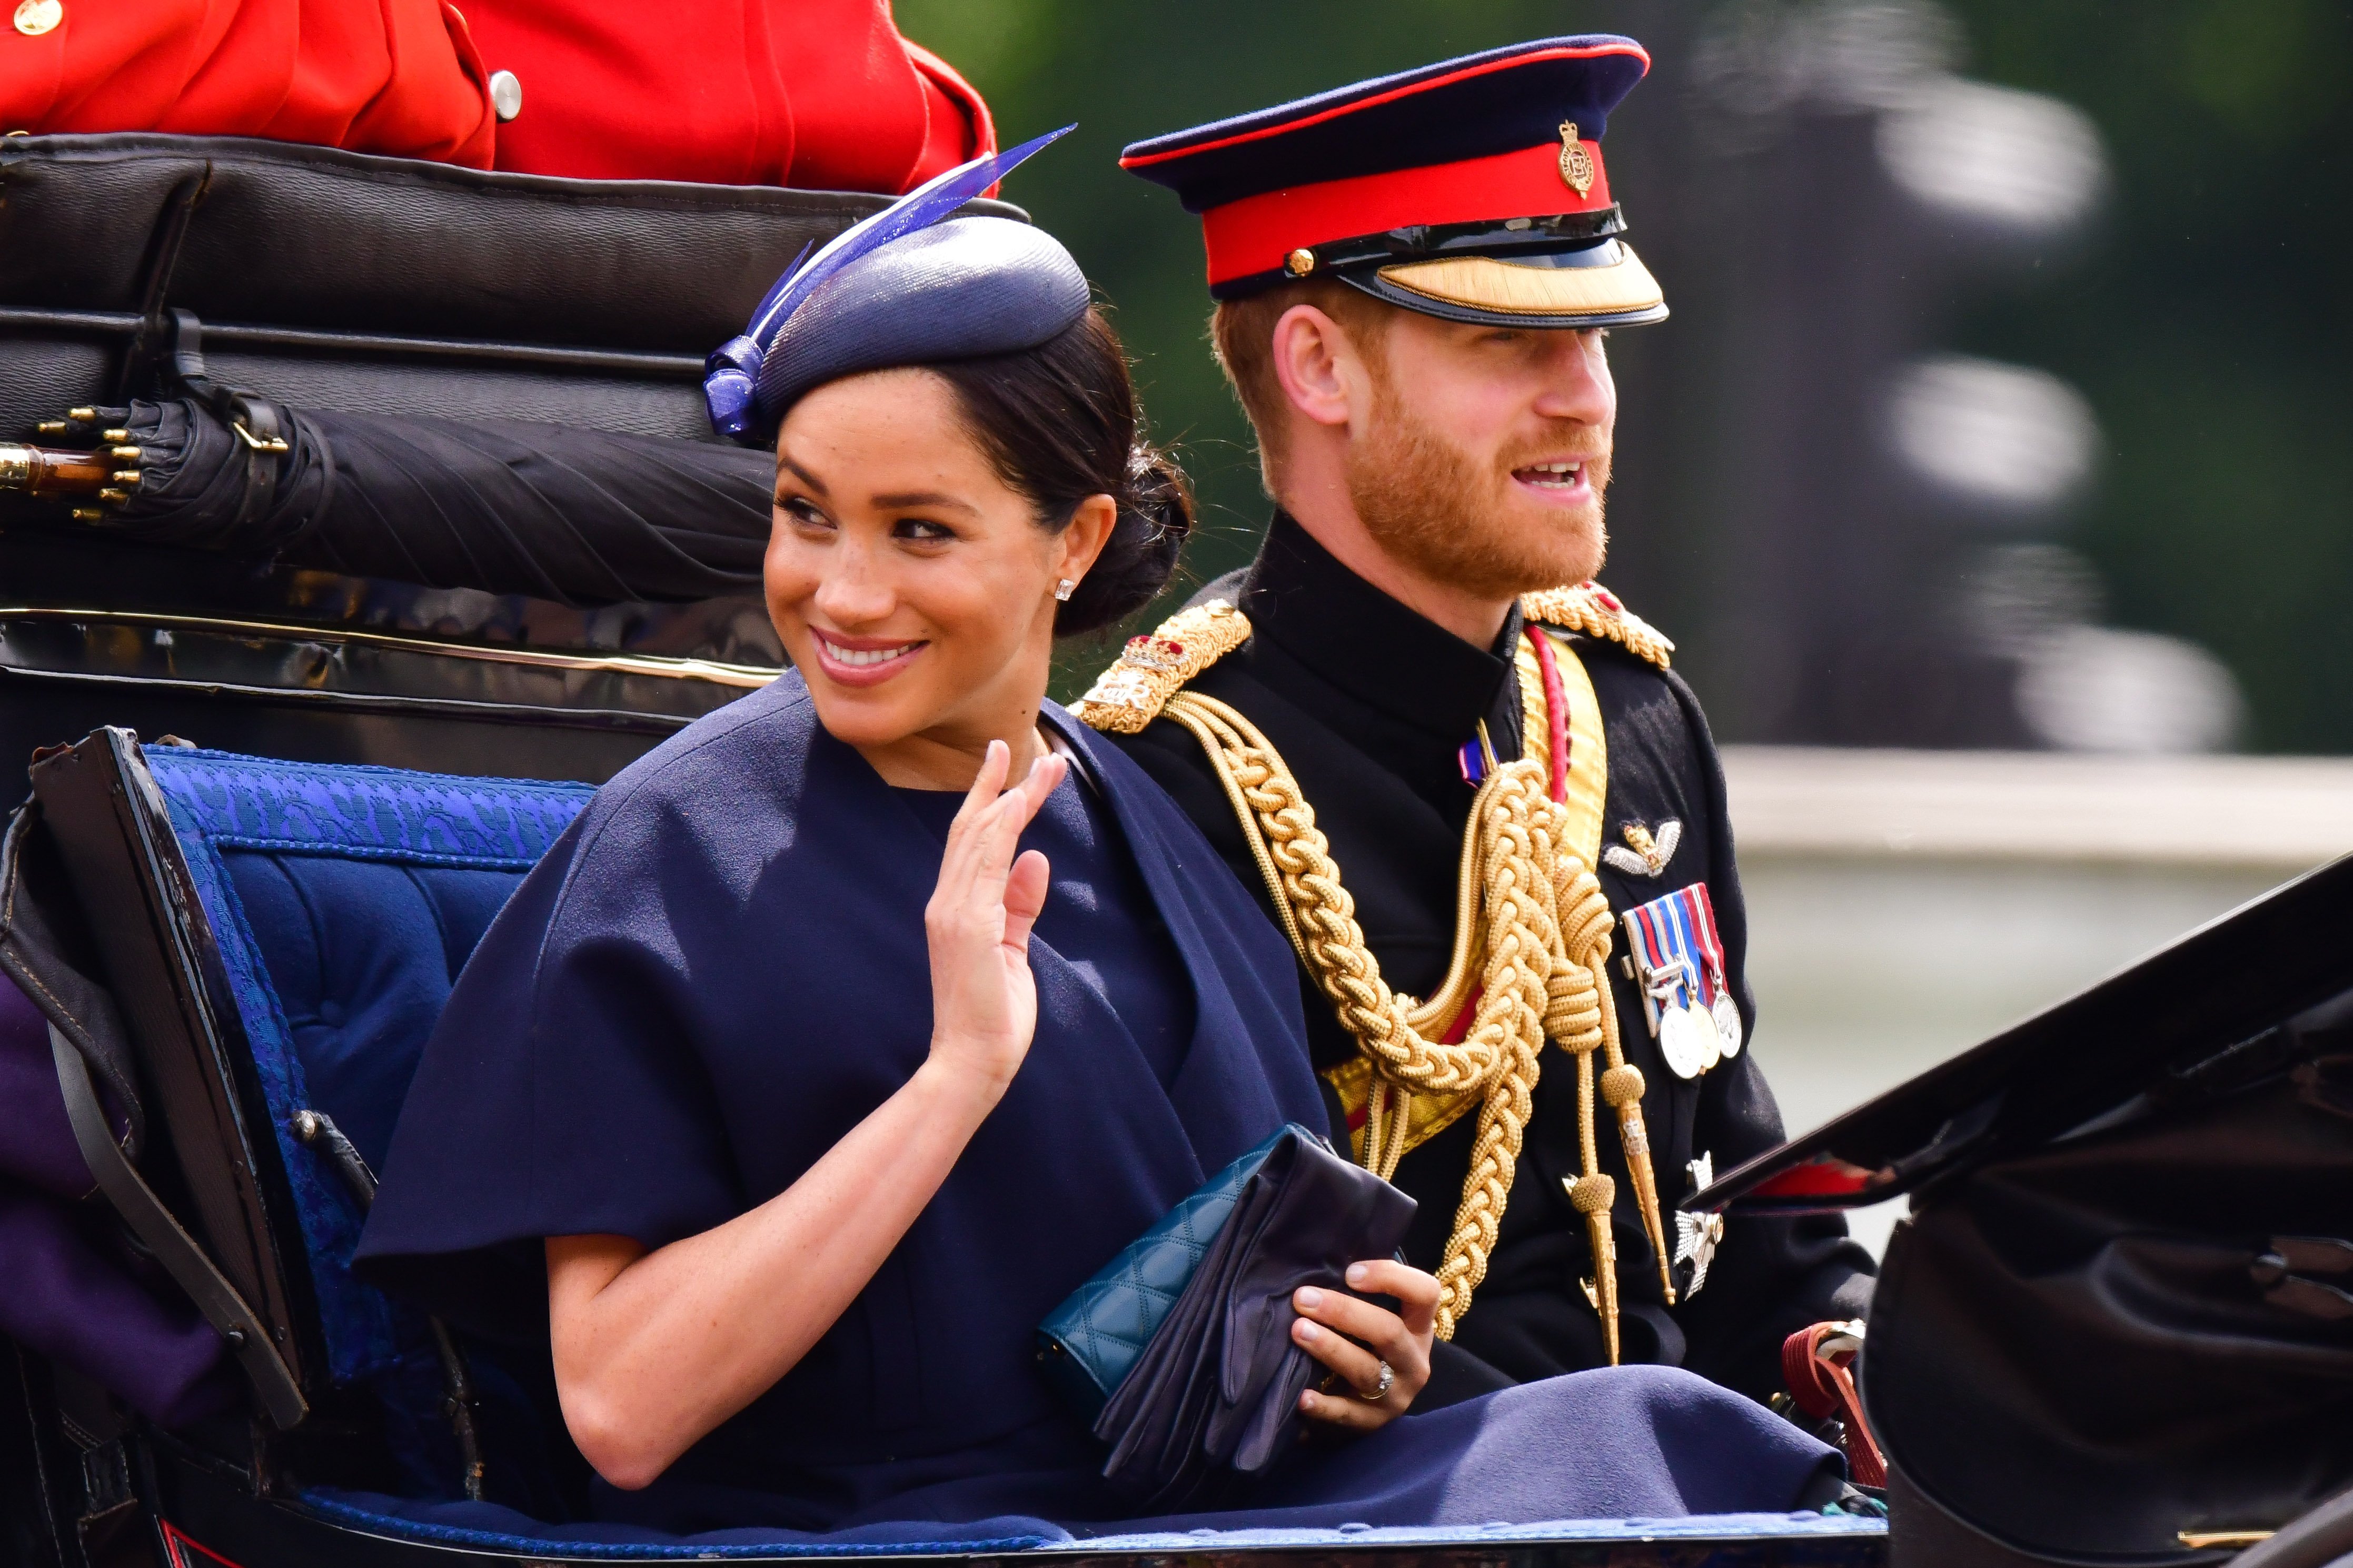 Prince Harry and Meghan Markle attend Trooping the Color in June 2019 | Photo: Getty Images